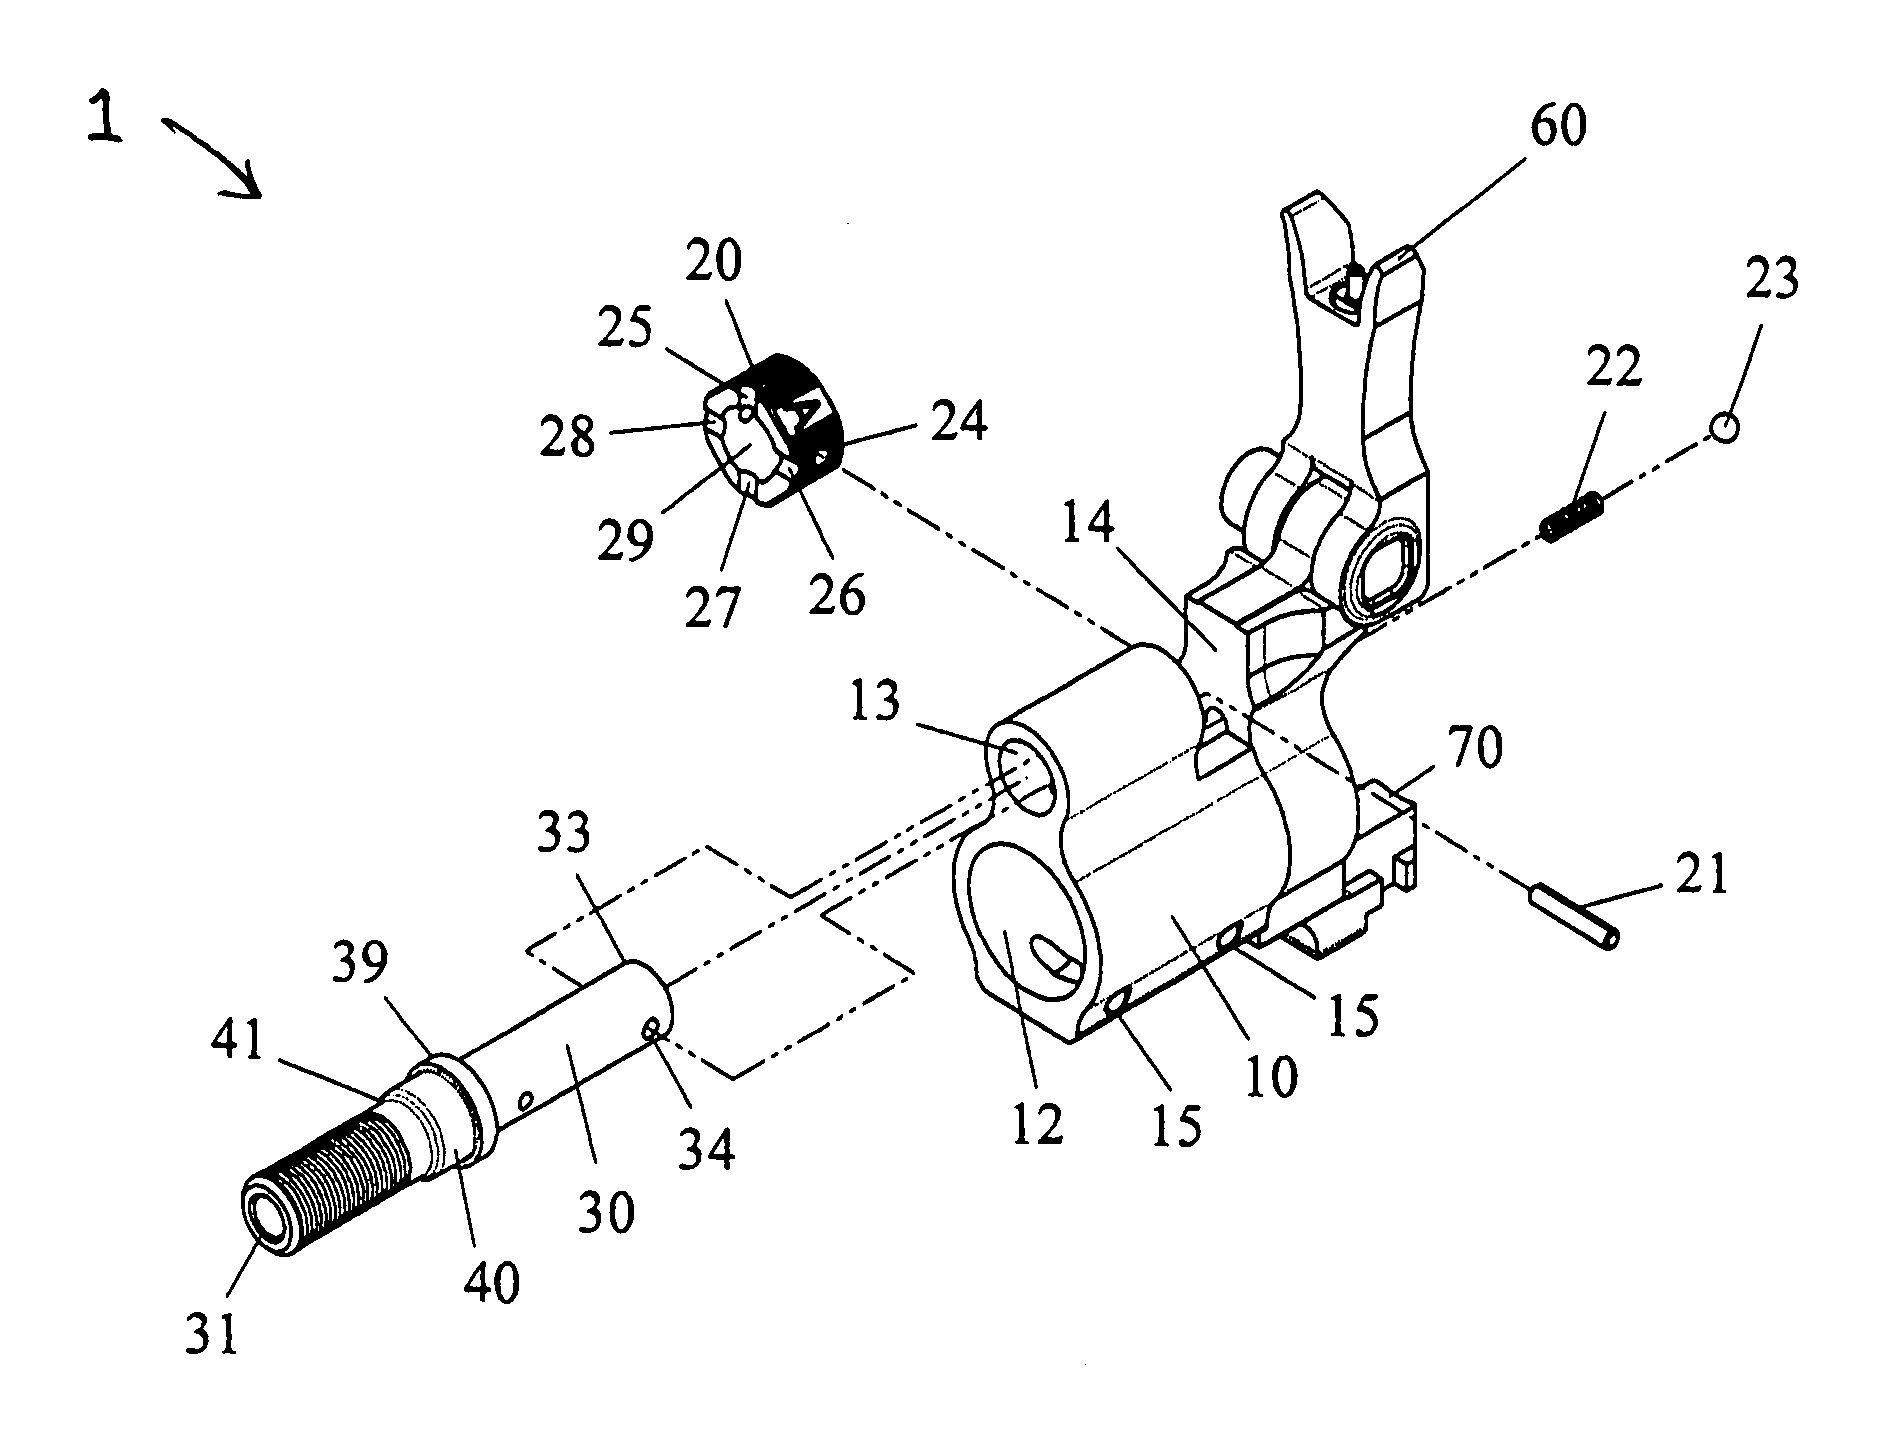 Adjustable gas block for an indirect gas operated firearm